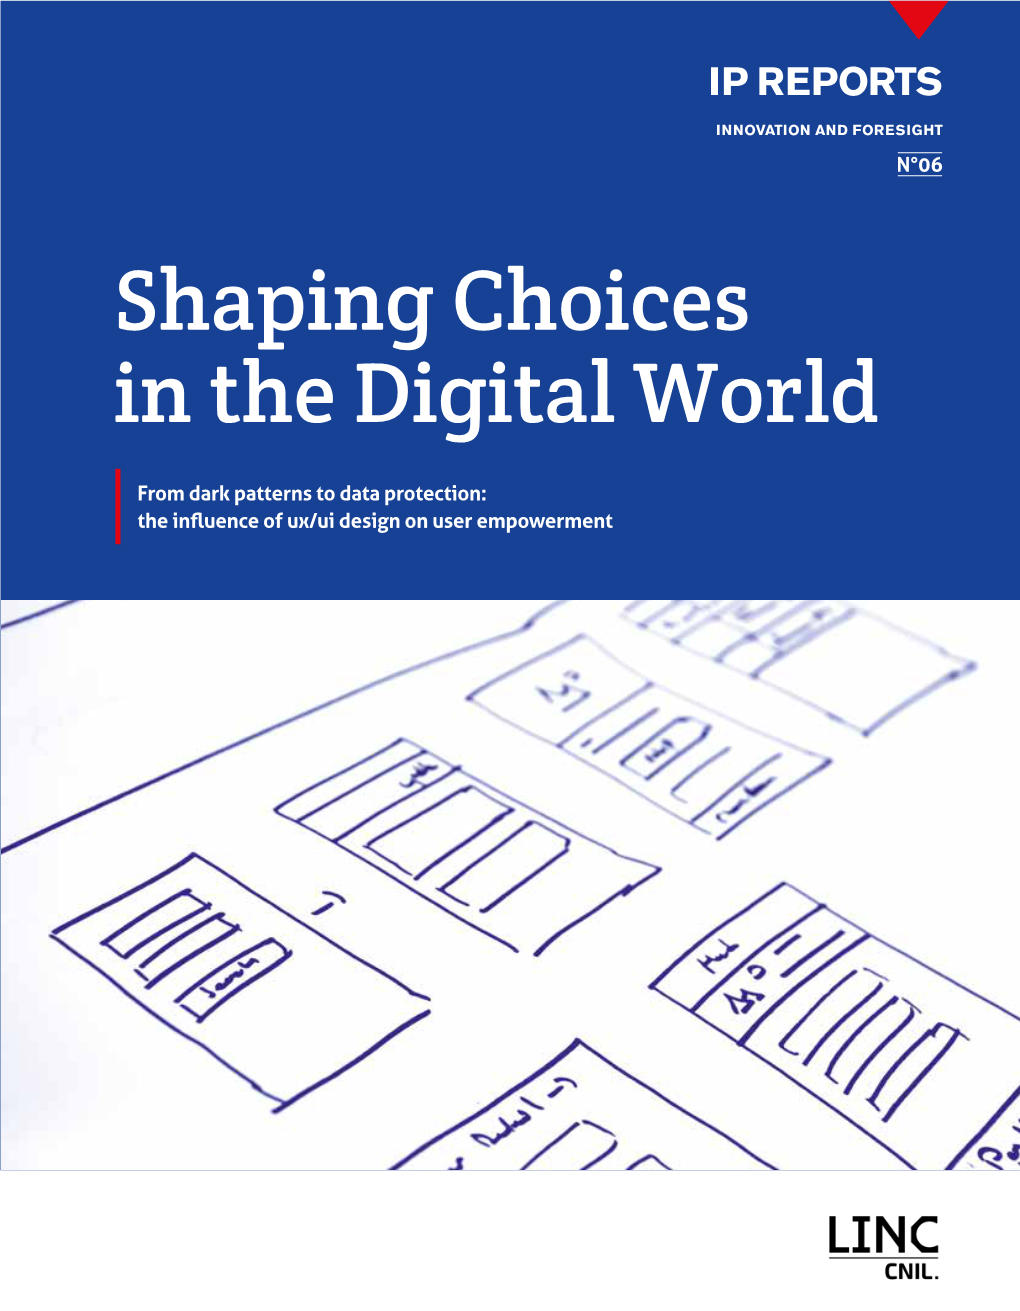 Shaping Choices in the Digital World